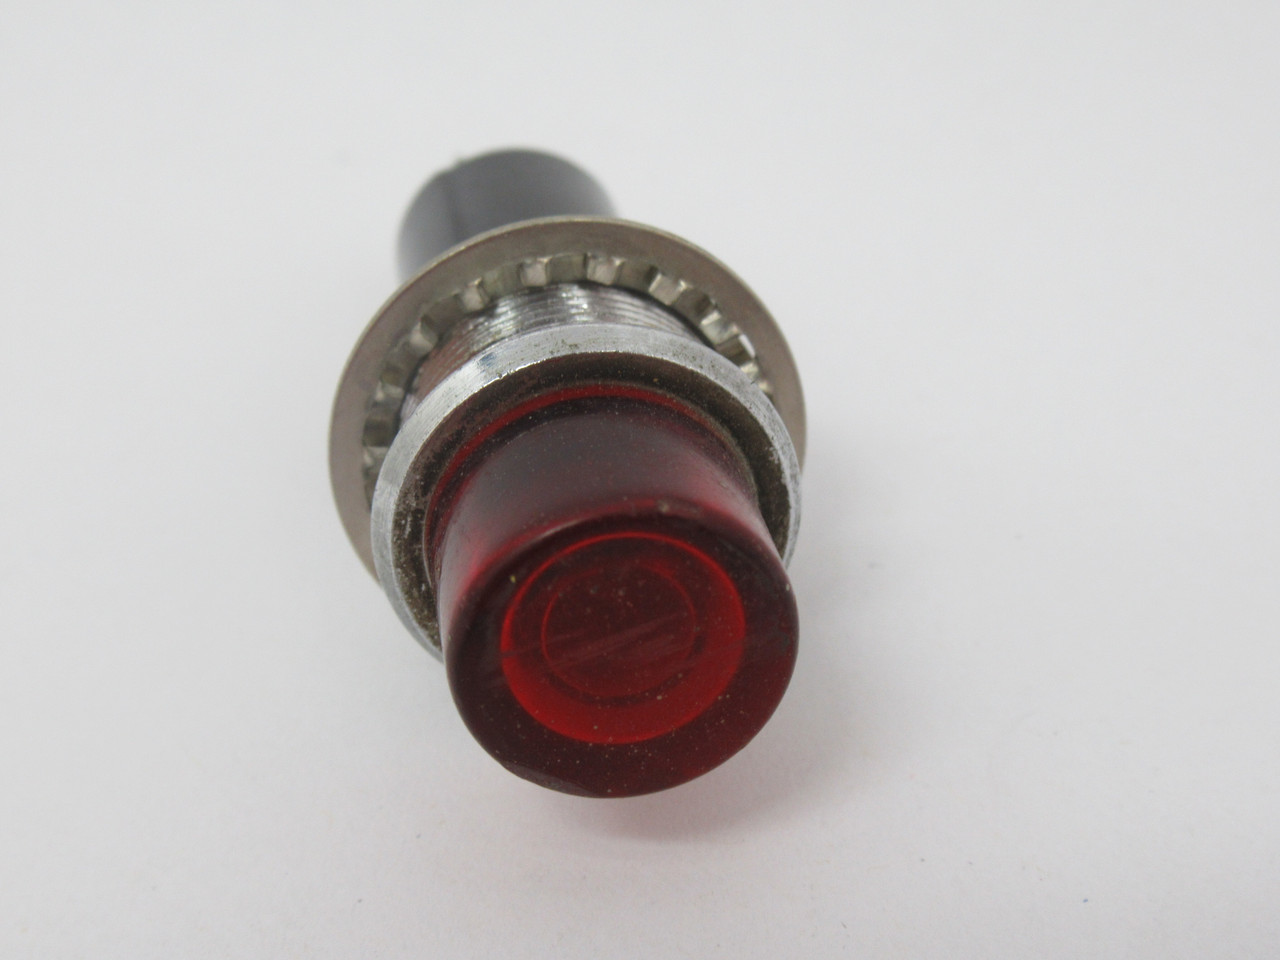 Dialco 135-0410-1431-301 Red Miniature Panel Mount Indicator 75W 125V USED